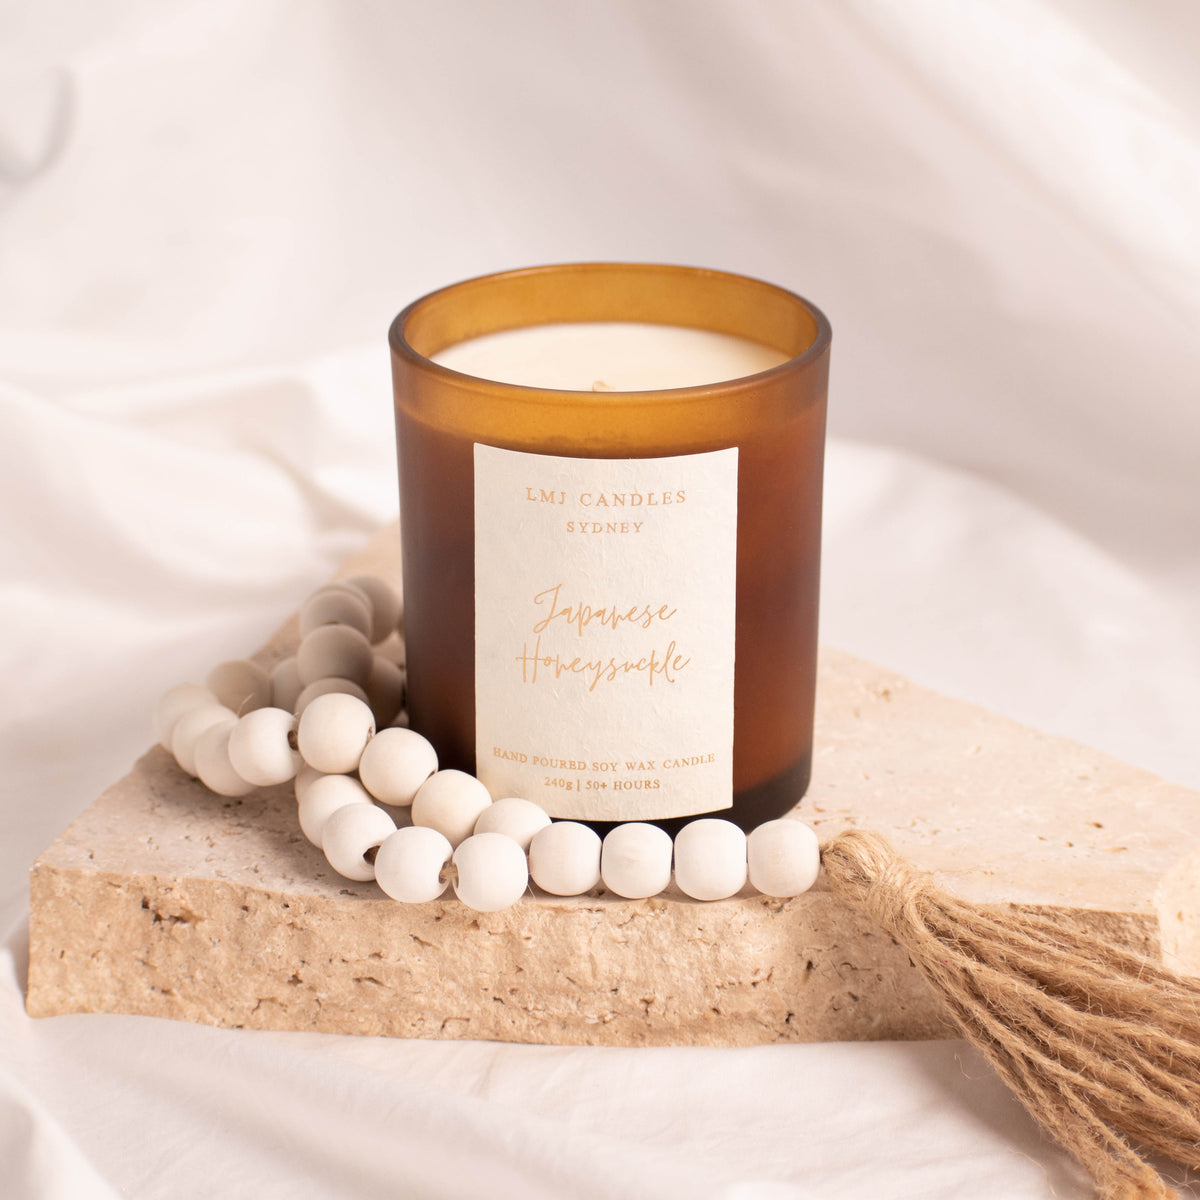 Amber Jar Candle, Japanese Honeysuckle Floral Candle, Handmade Scented Soy Wax Candle Australia | LMJ Candles